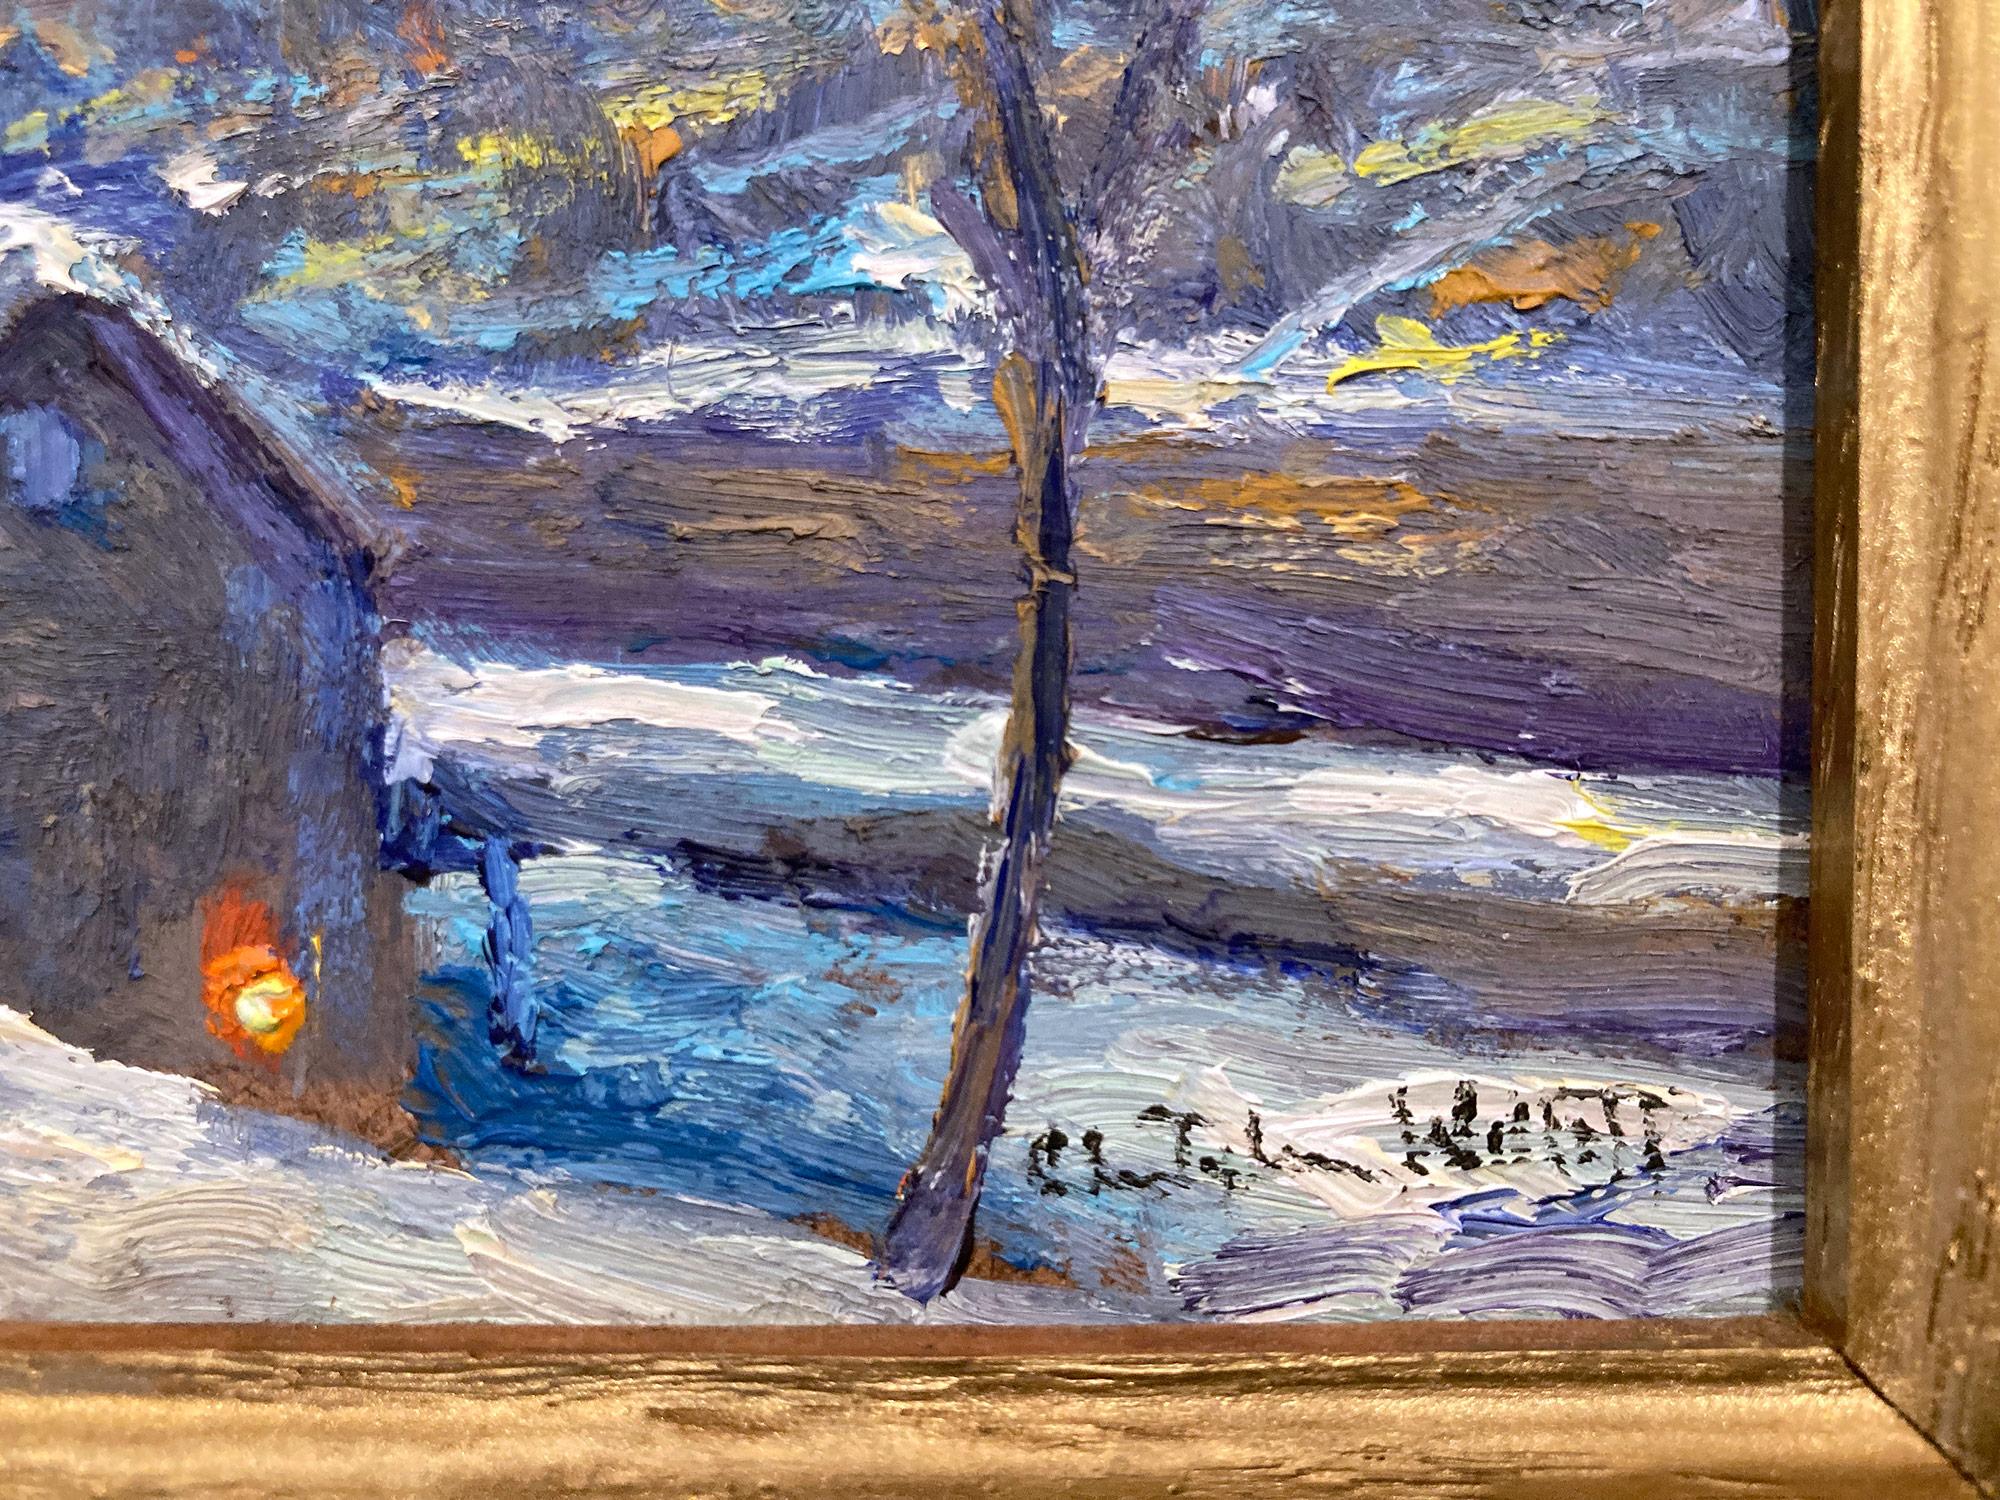 A beautiful Impressionist Evening pastoral scene of a quaint snow covered home in Bucks County PA. Willet has portrayed this piece in a most intimate, yet energetic way, and has packed much feeling into this miniature work. We can feel the fire on